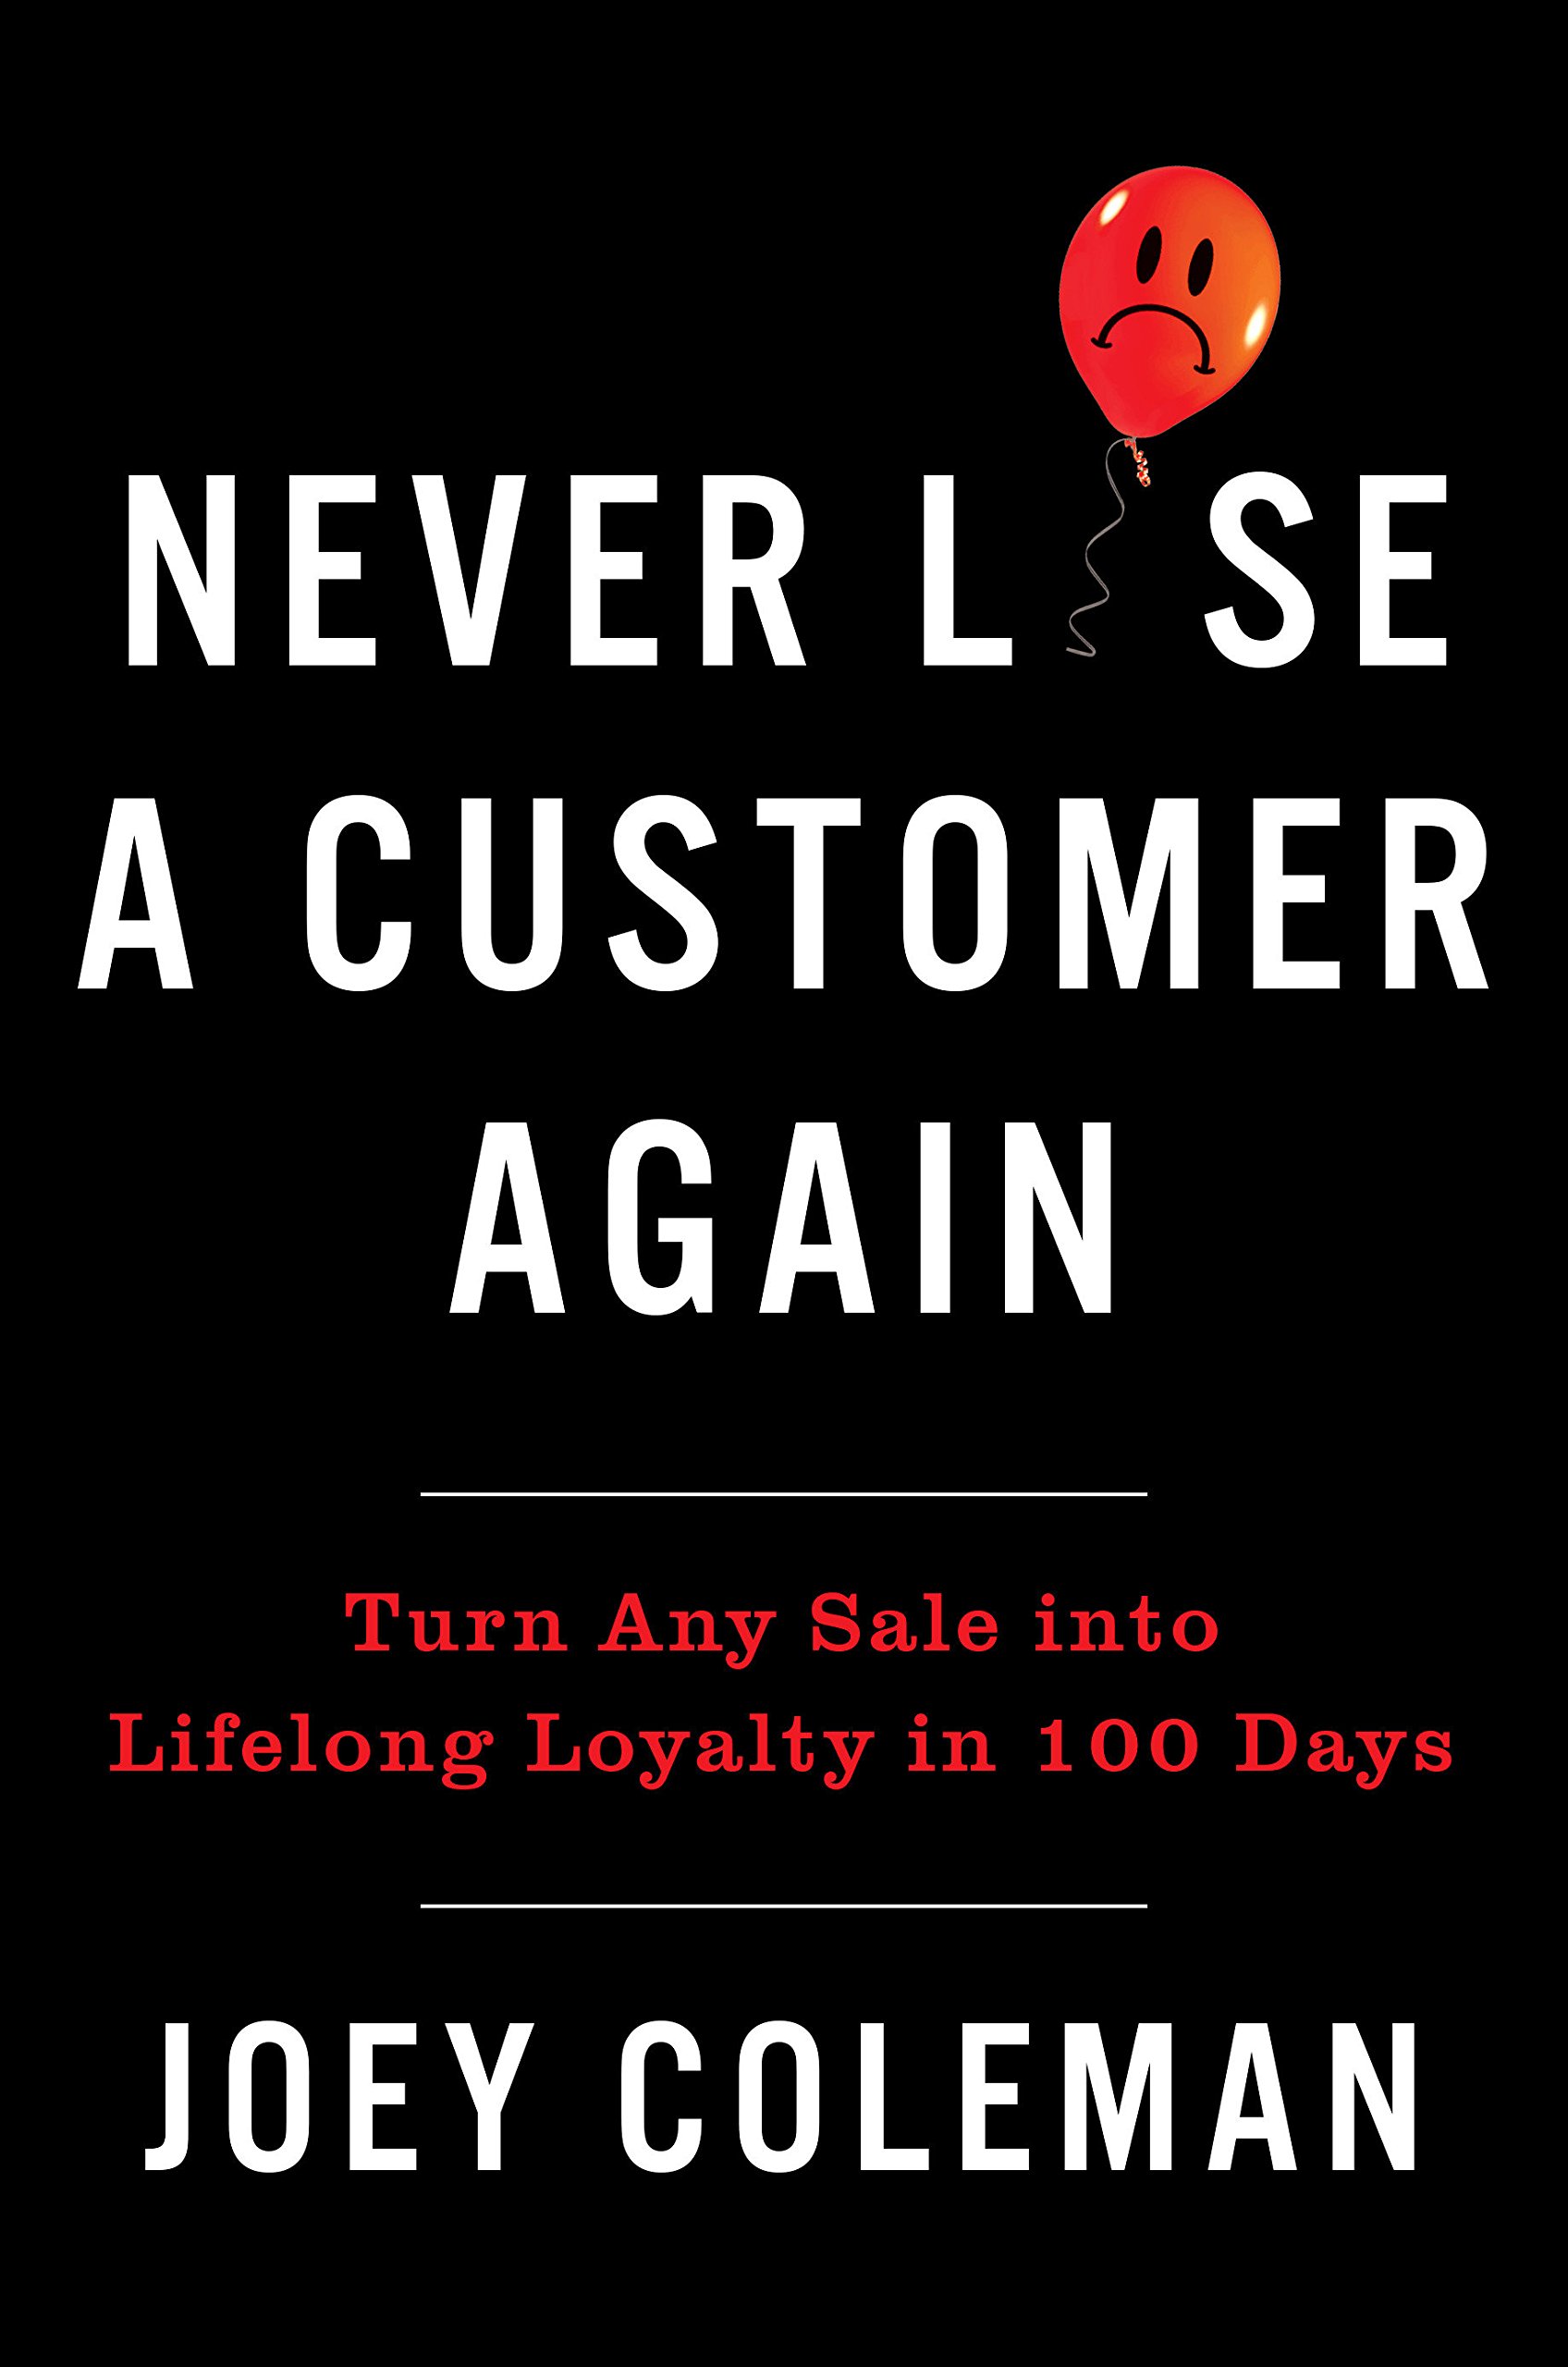 Never Lose A Customer Again - Joey Coleman